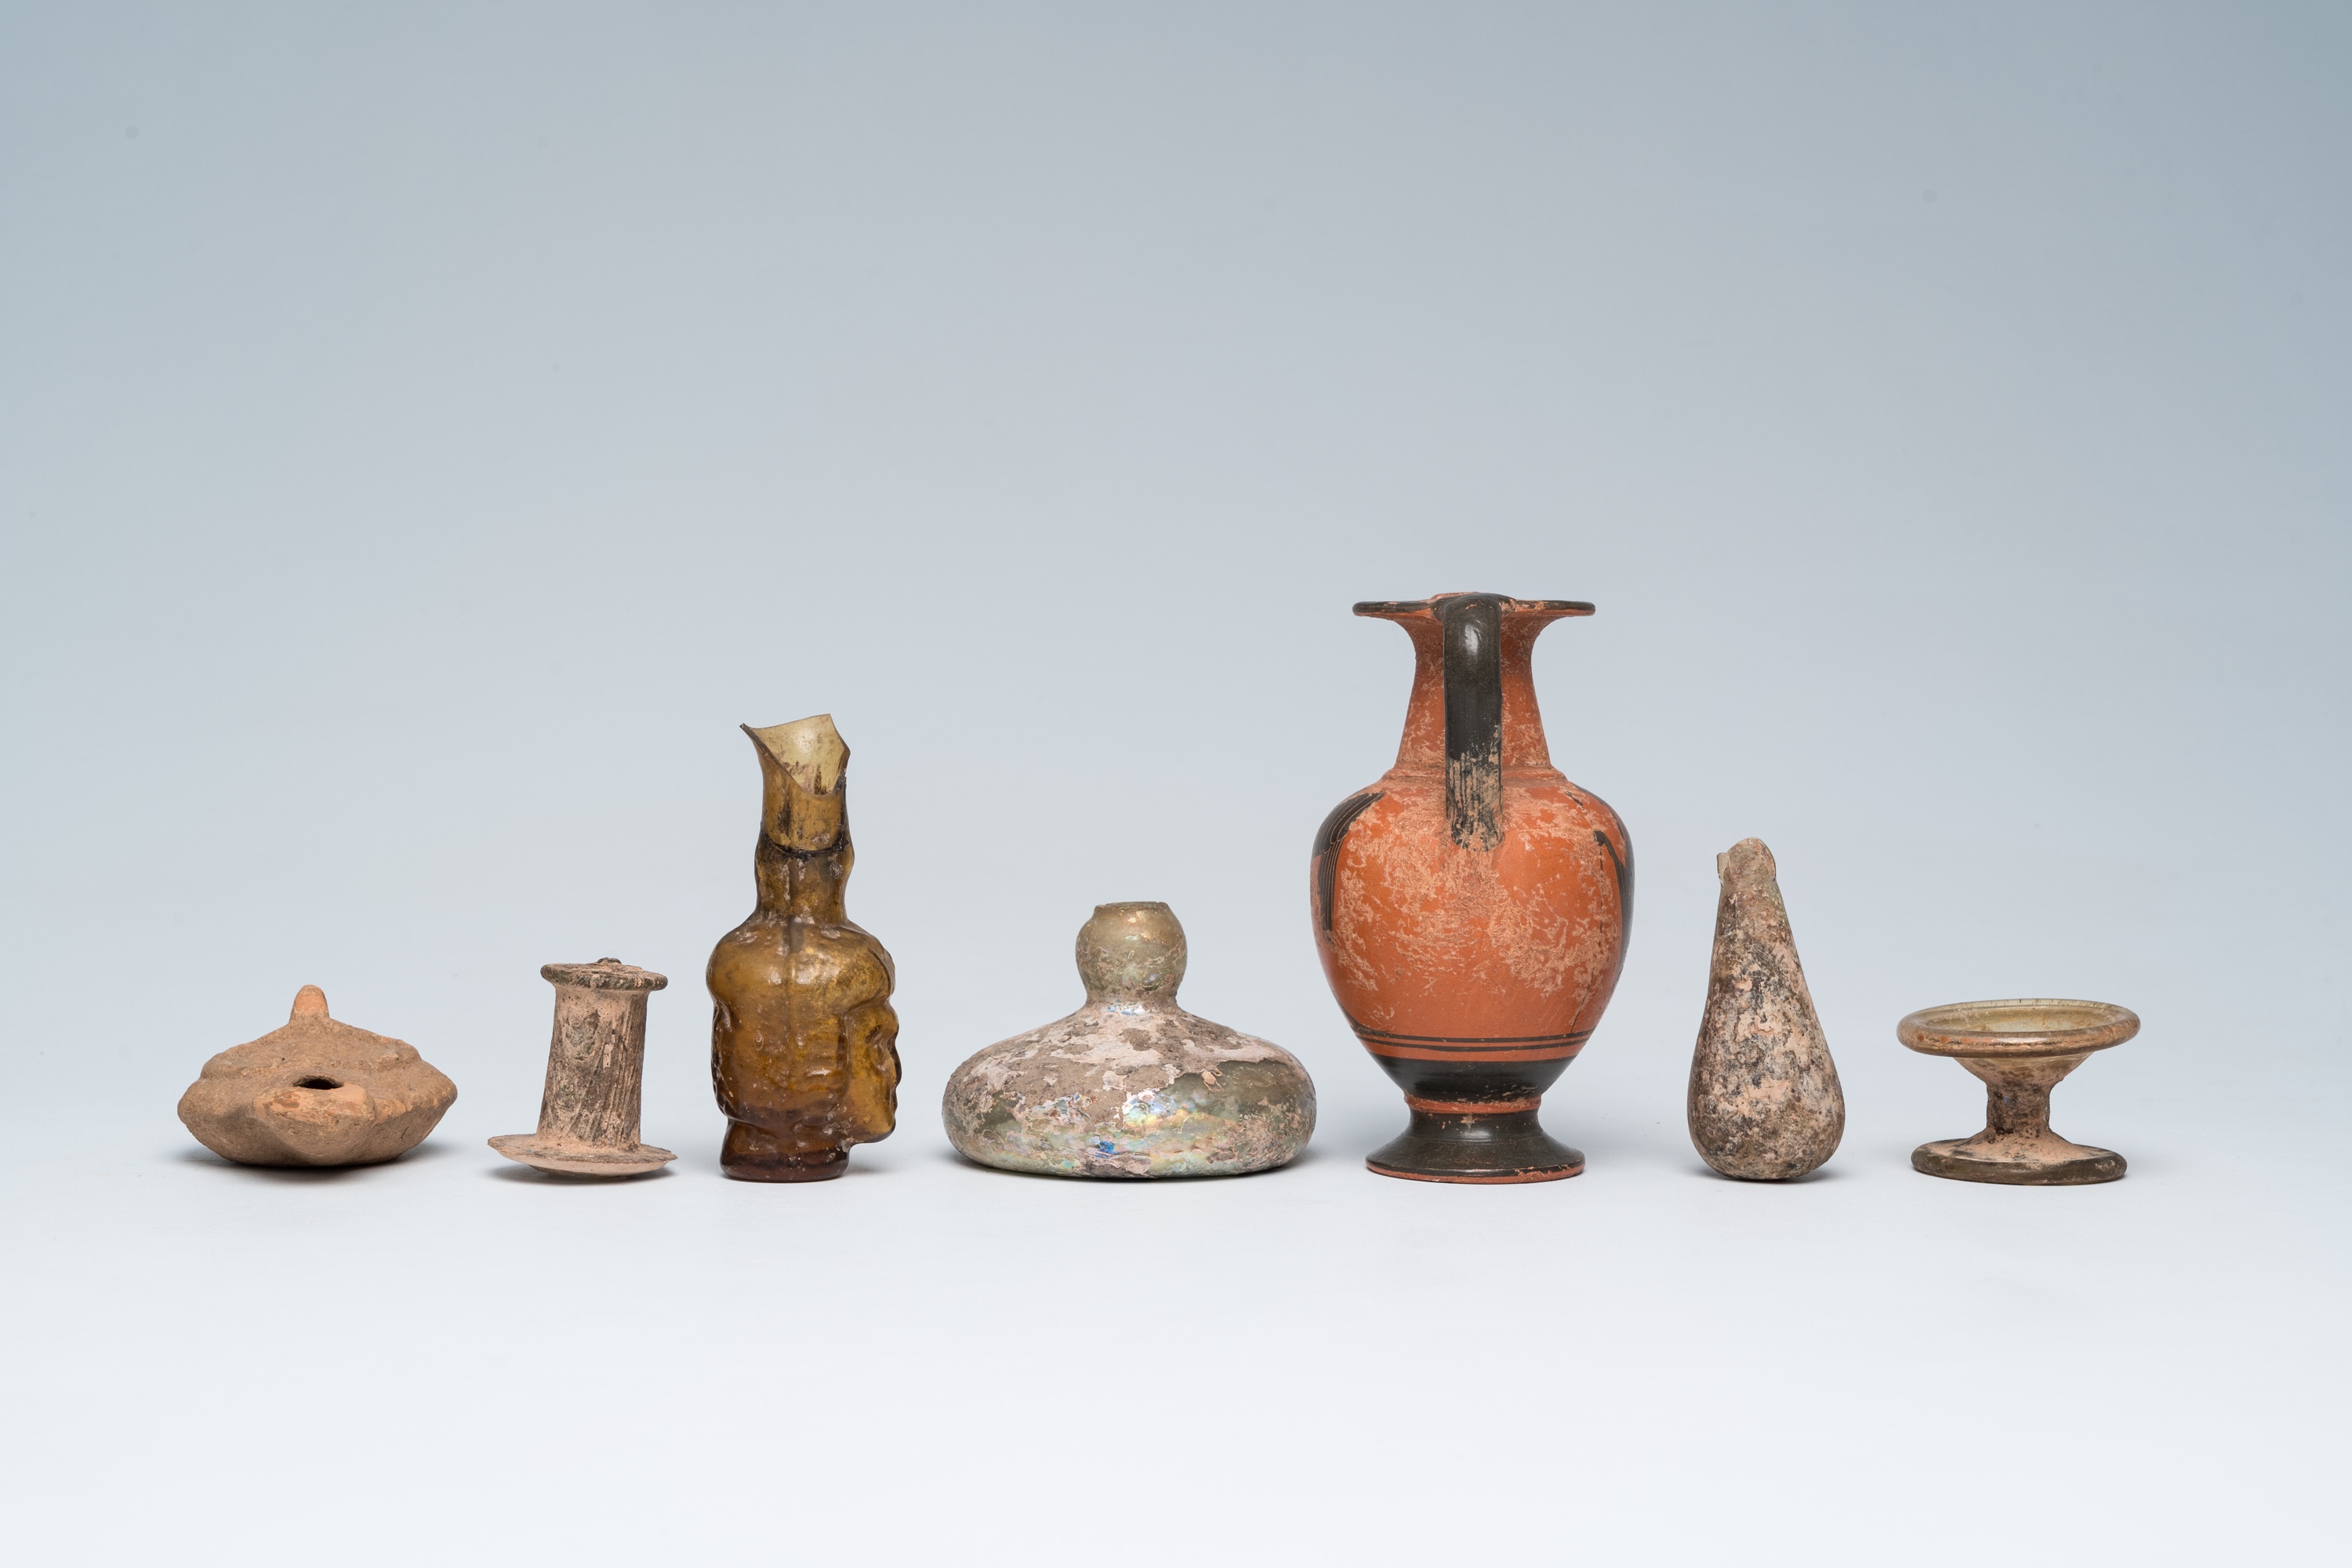 A varied collection of archaeological glass and pottery utensils and fragments, Greco-Roman period a - Image 4 of 7